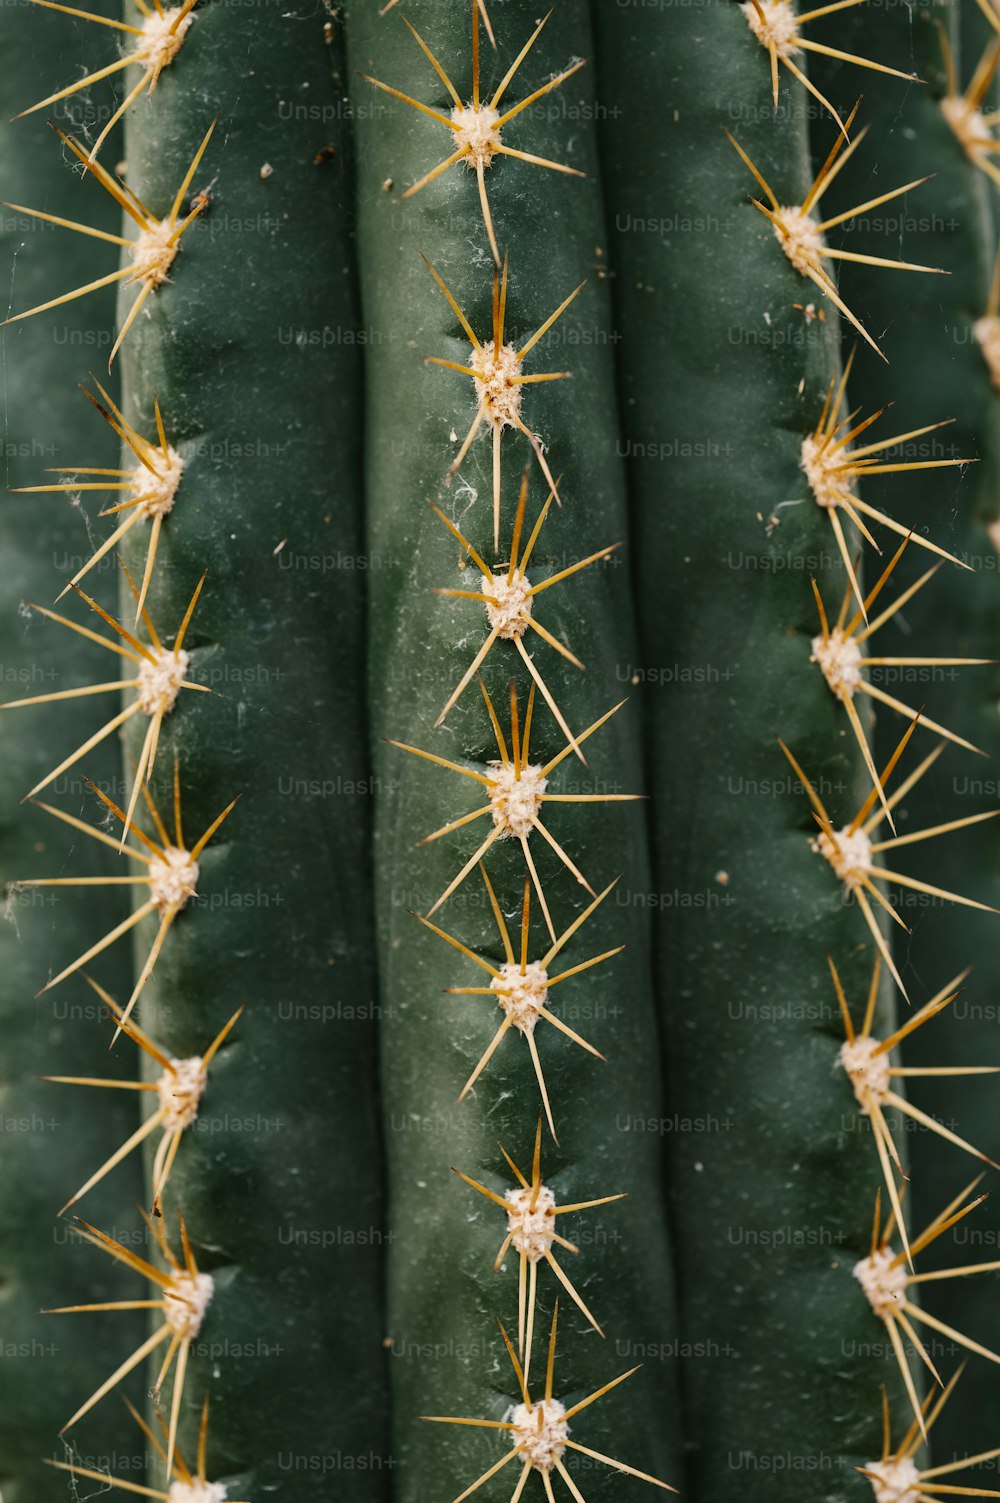 a close up of a green cactus with lots of spikes